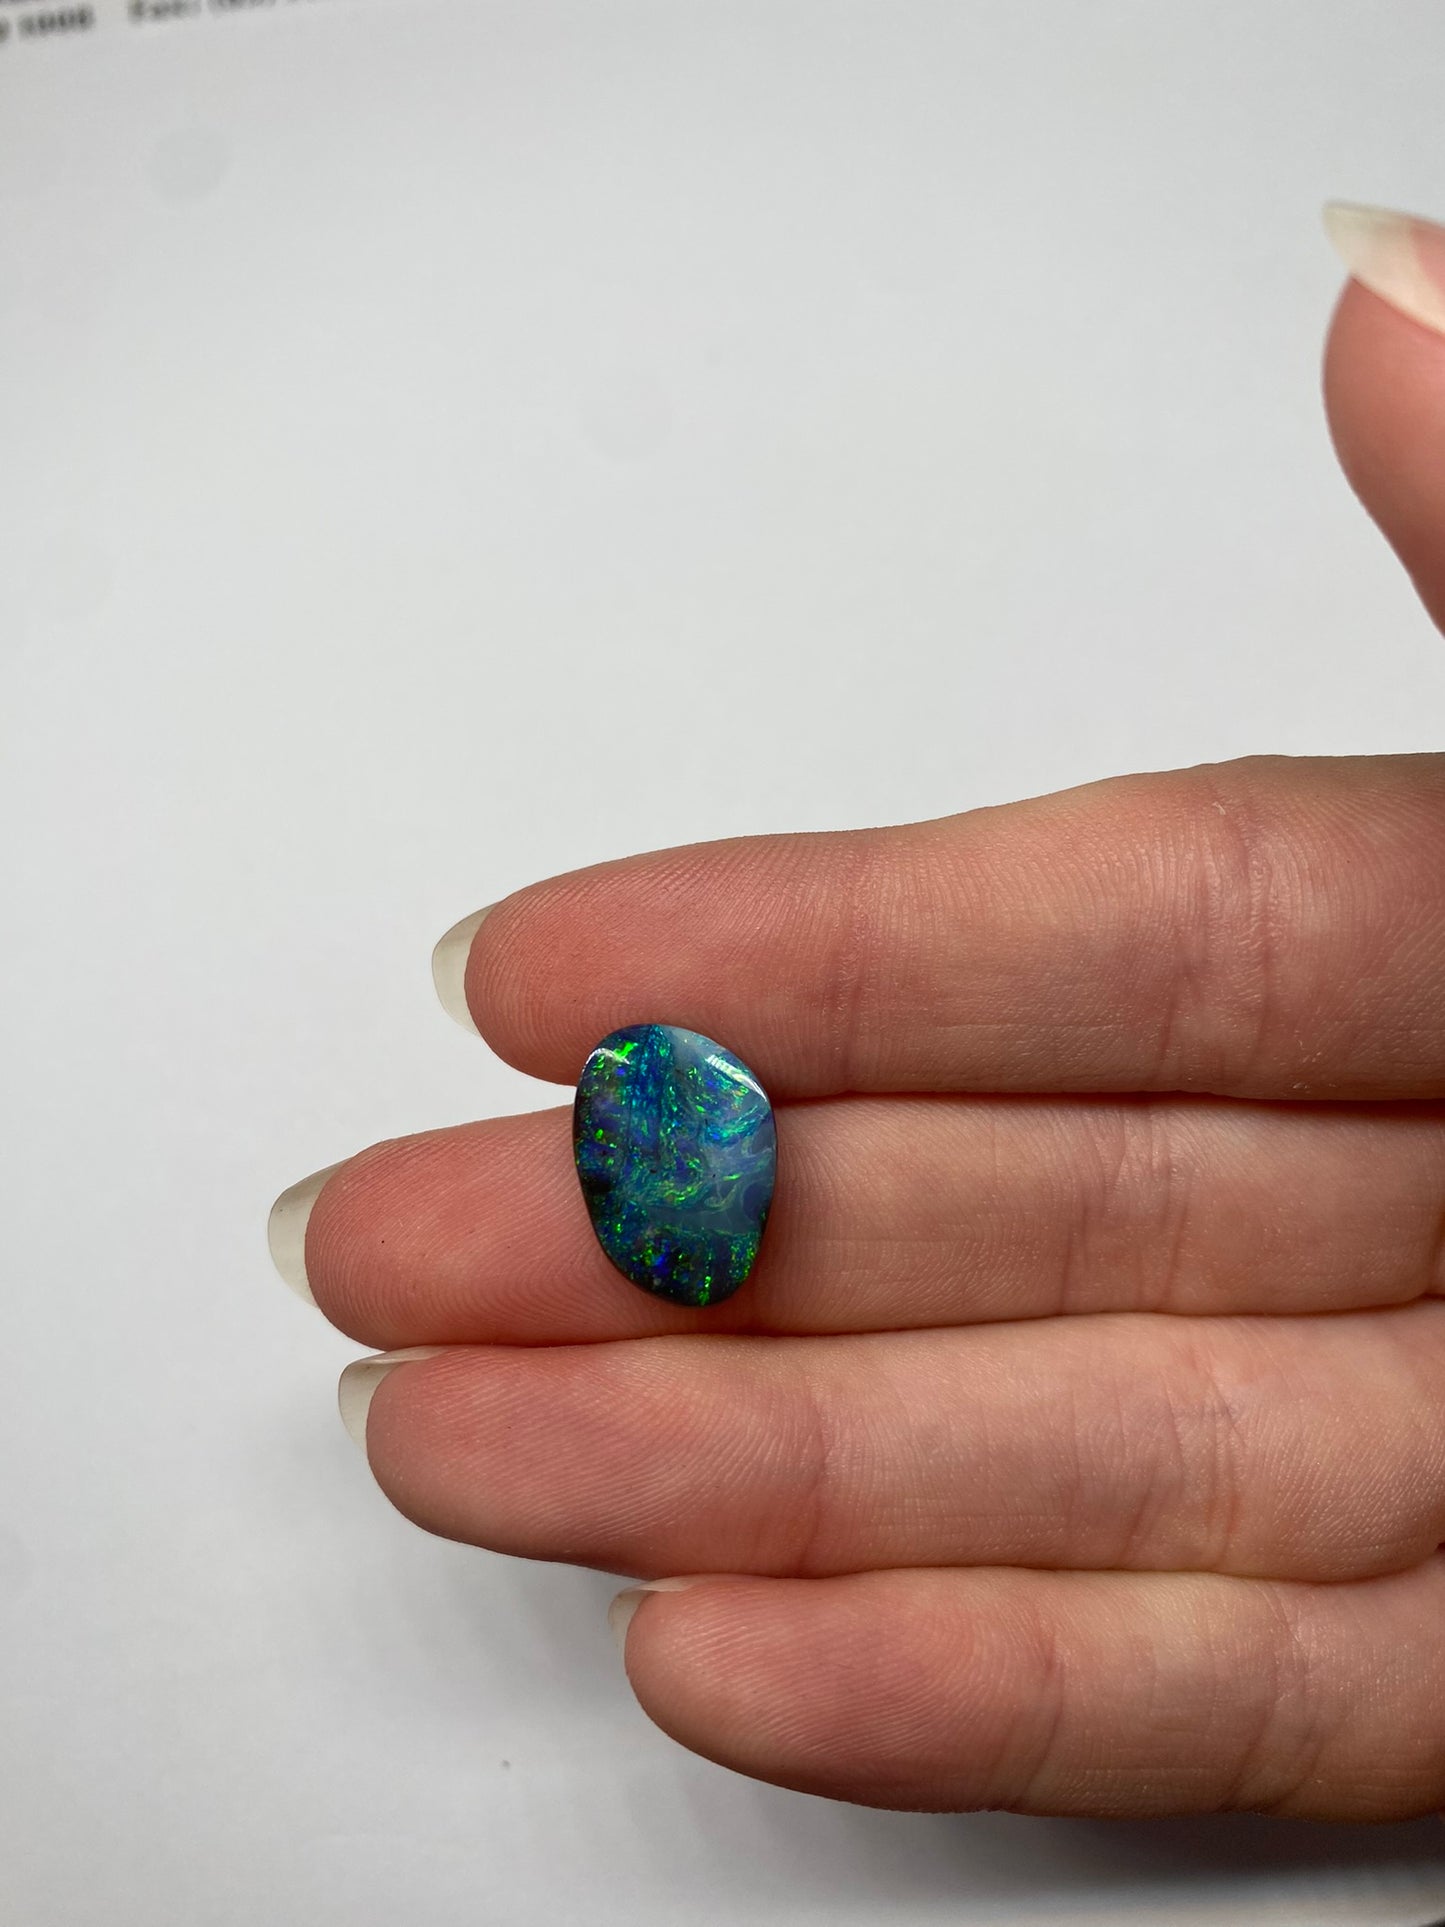 Blue Lagoon Opal - custom made in a ring for you